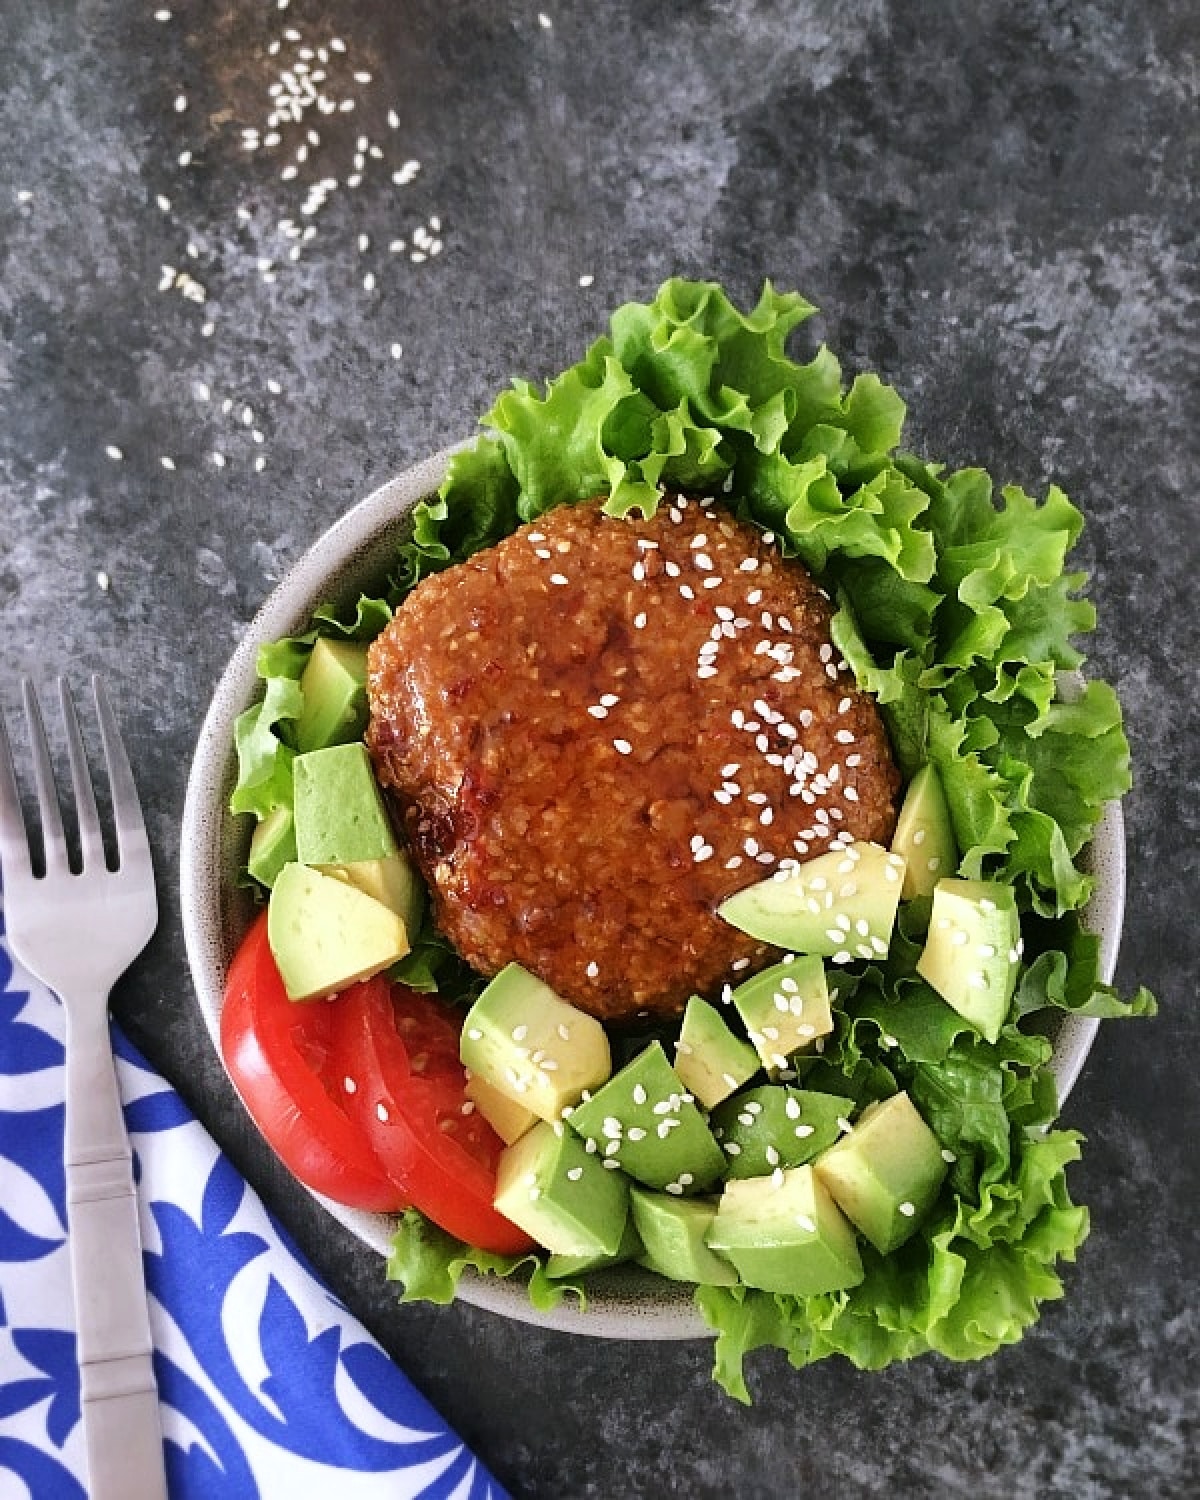 Overhead view of a ginger sesame teriyaki burger sitting on a bed of curly lettuce, tomato slices, and cubed avocado. The whole dish is topped with white sesame seeds, and a fork on a blue and white napkin sits alongside.